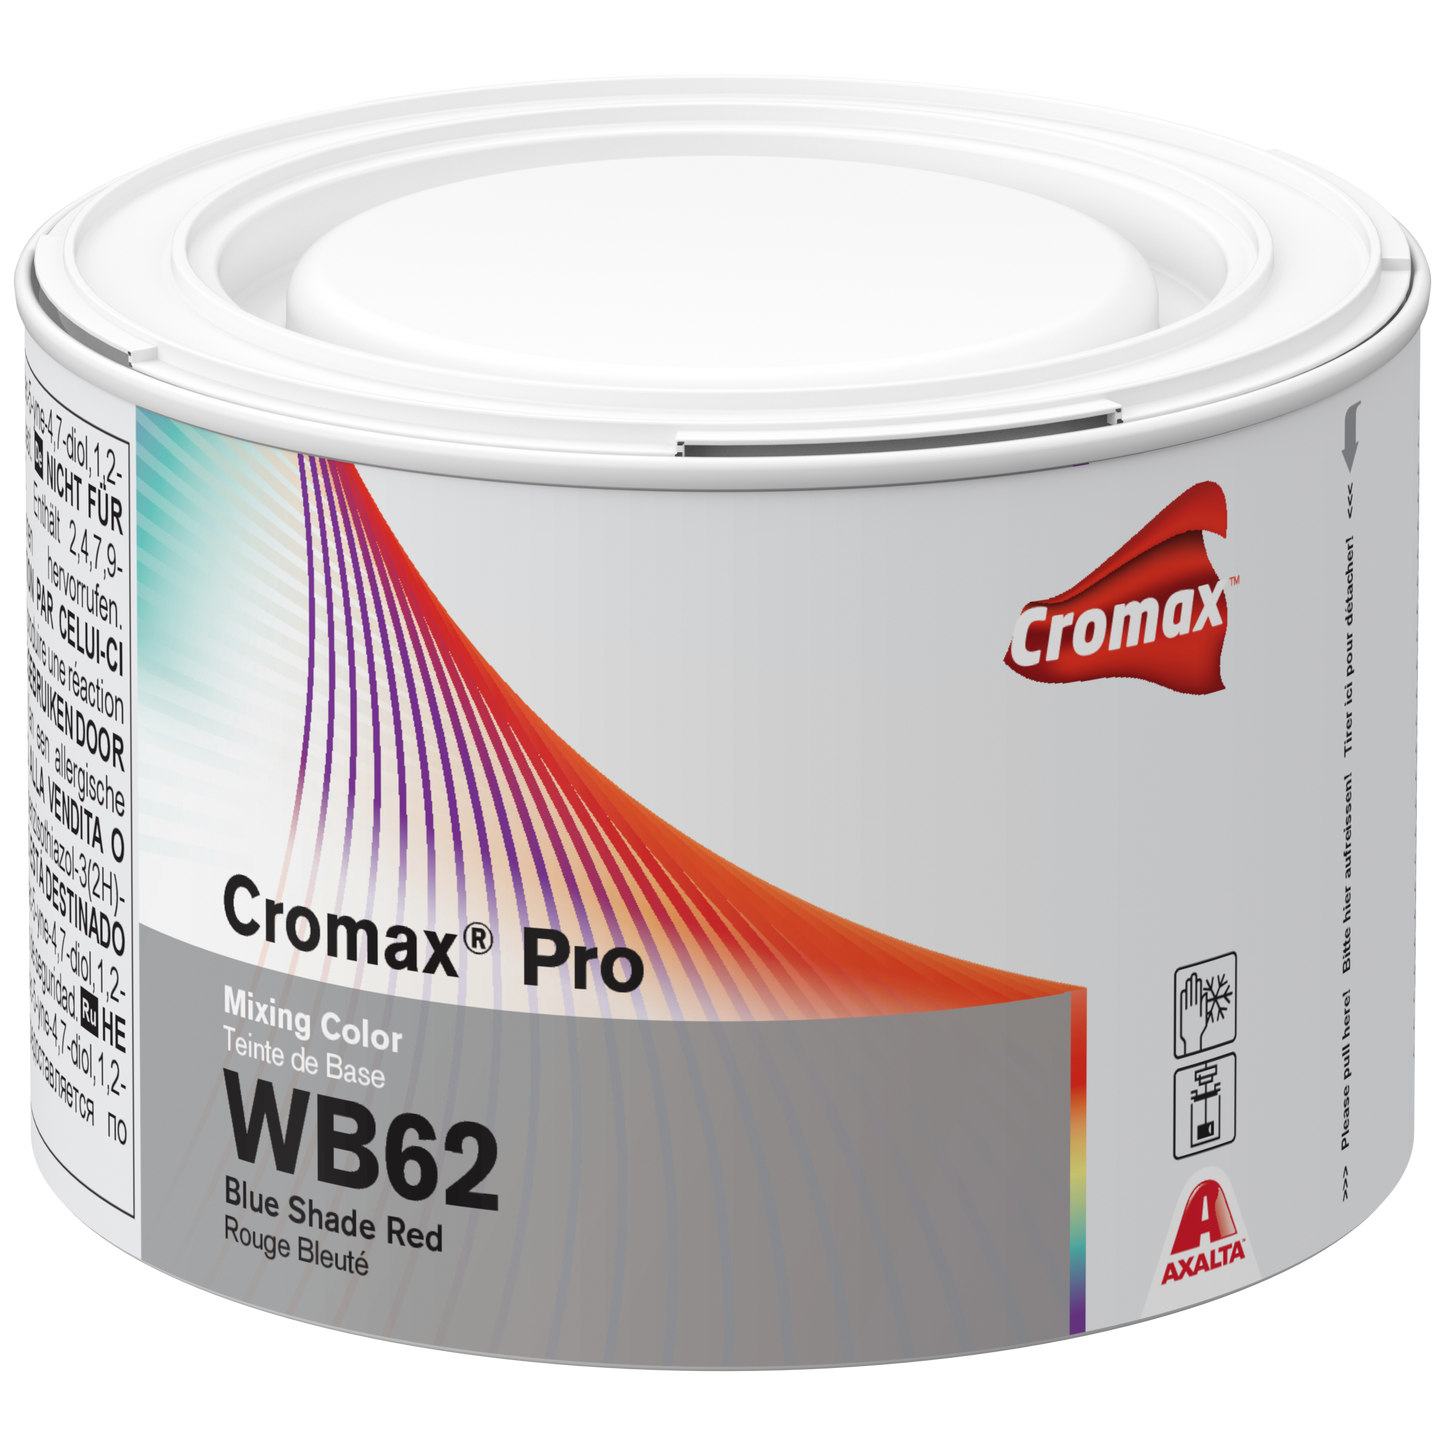 Cromax Pro Mixing Color Blue Shade Red - 0.5 lit